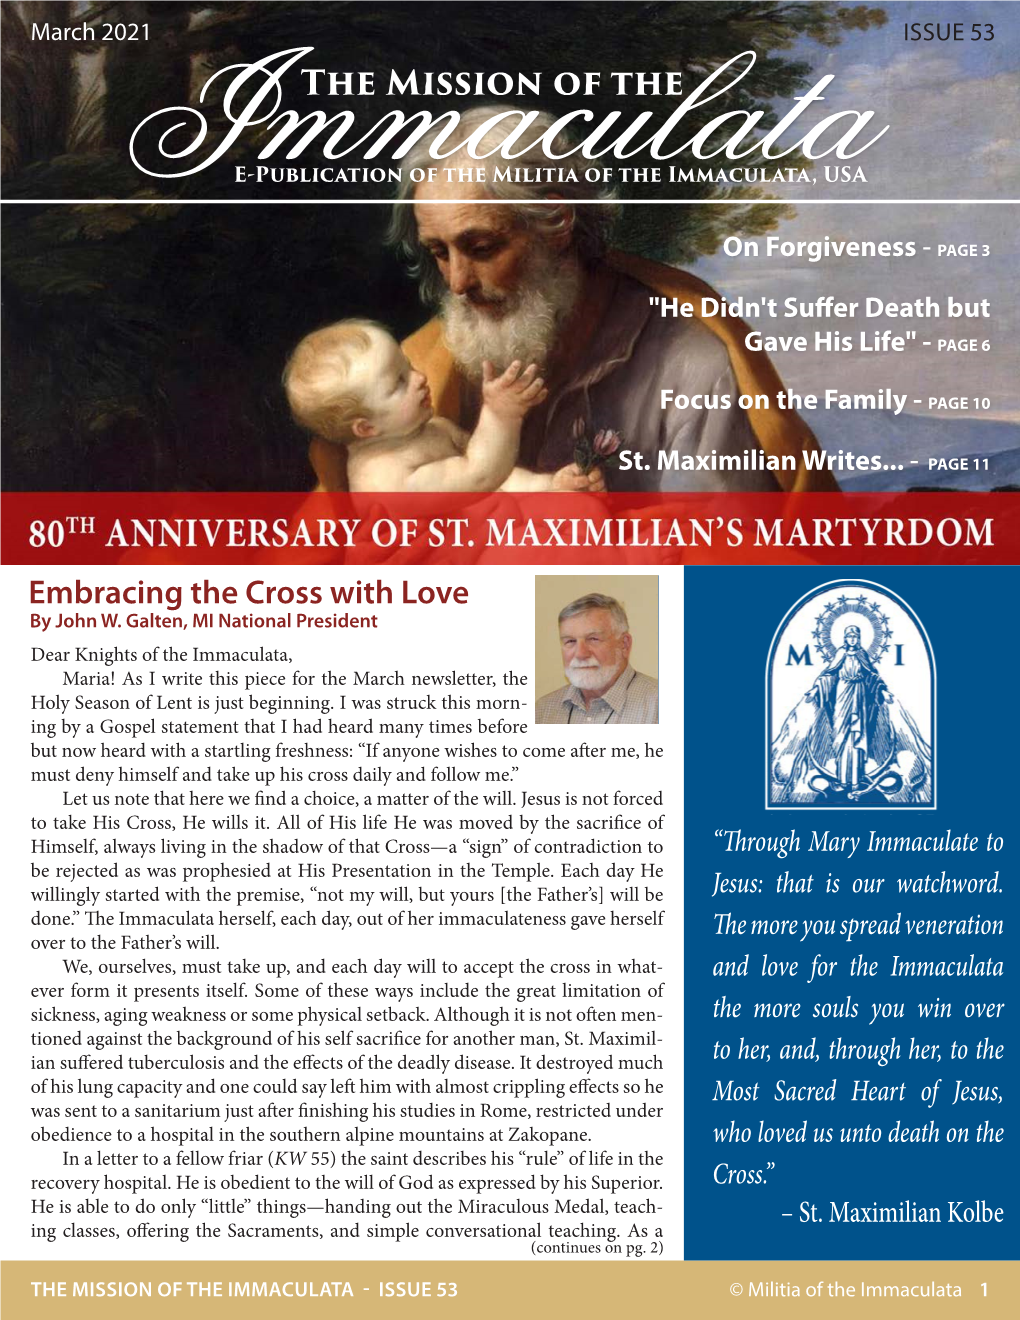 The Mission of the Immaculata Issue 53 March 2021